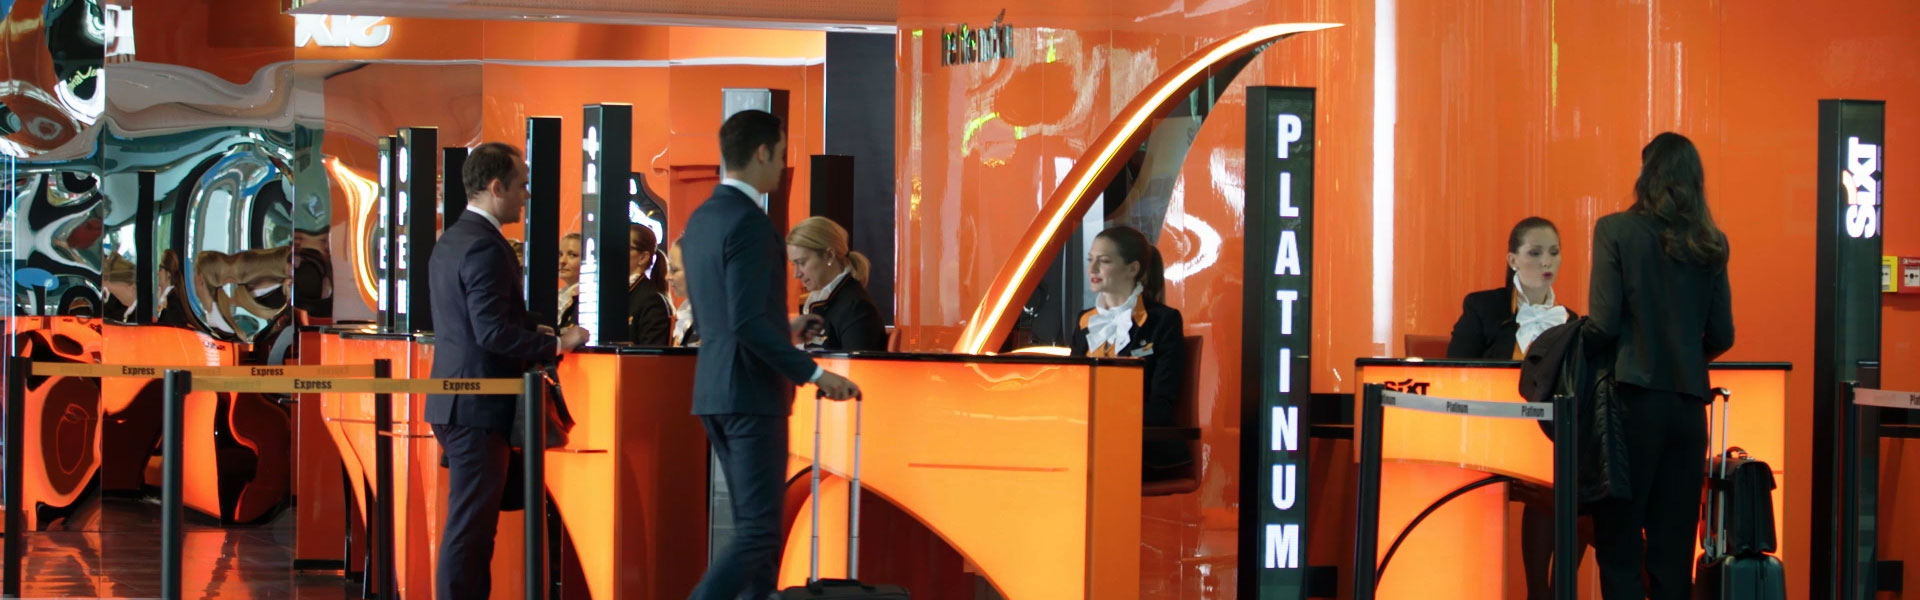 SIXT FASTLANE – NO WAITING TIME AT THE COUNTER